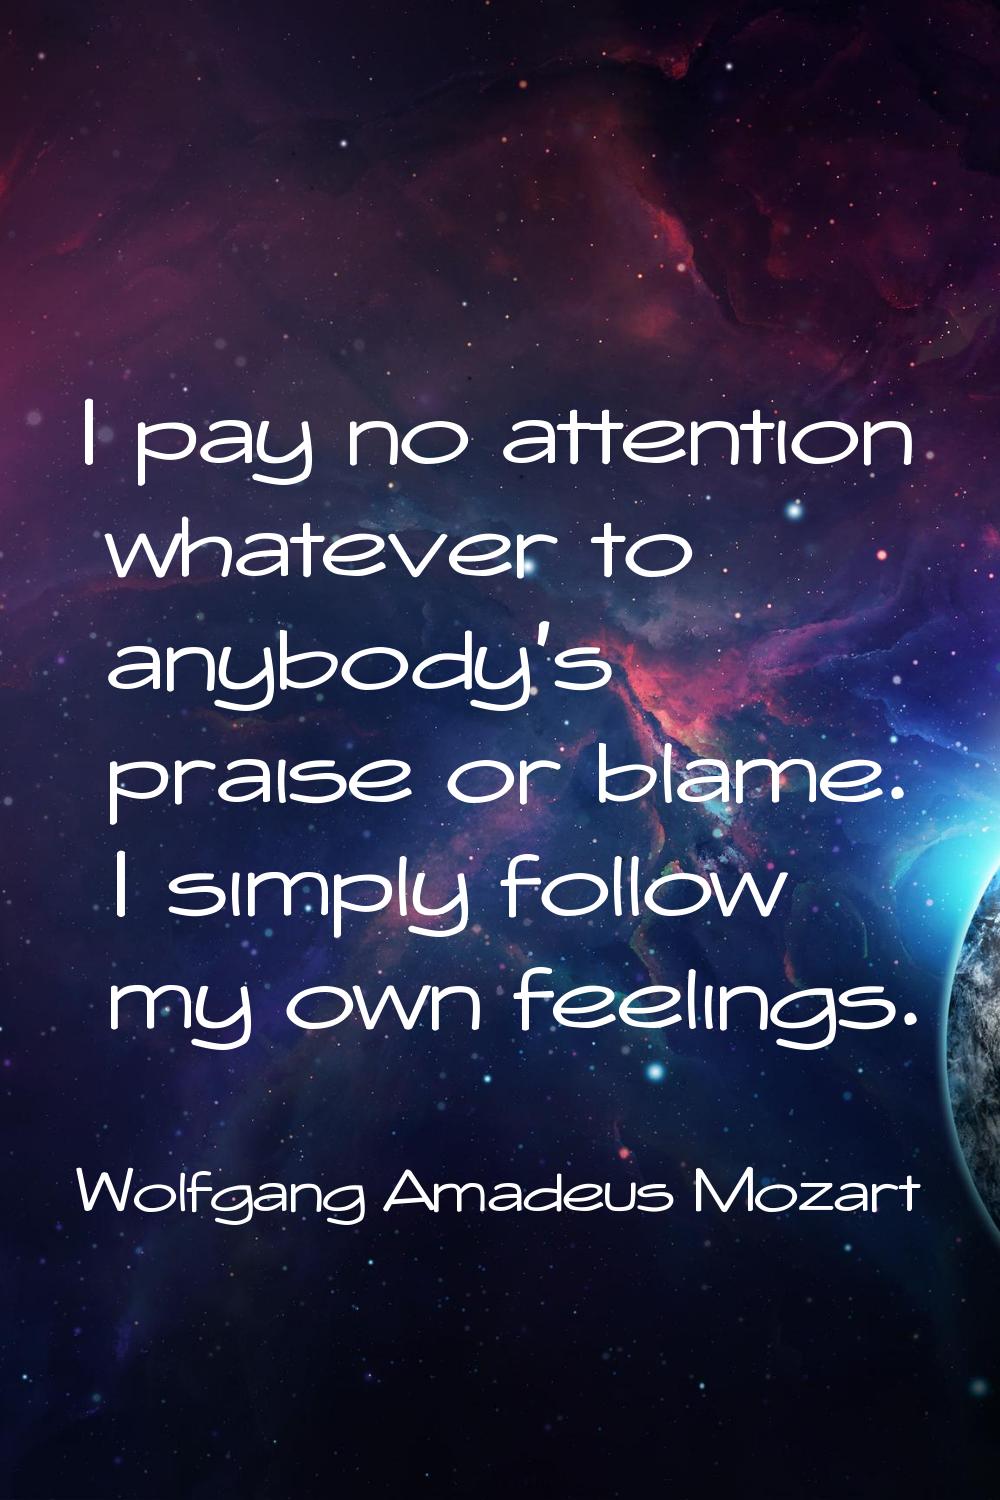 I pay no attention whatever to anybody's praise or blame. I simply follow my own feelings.